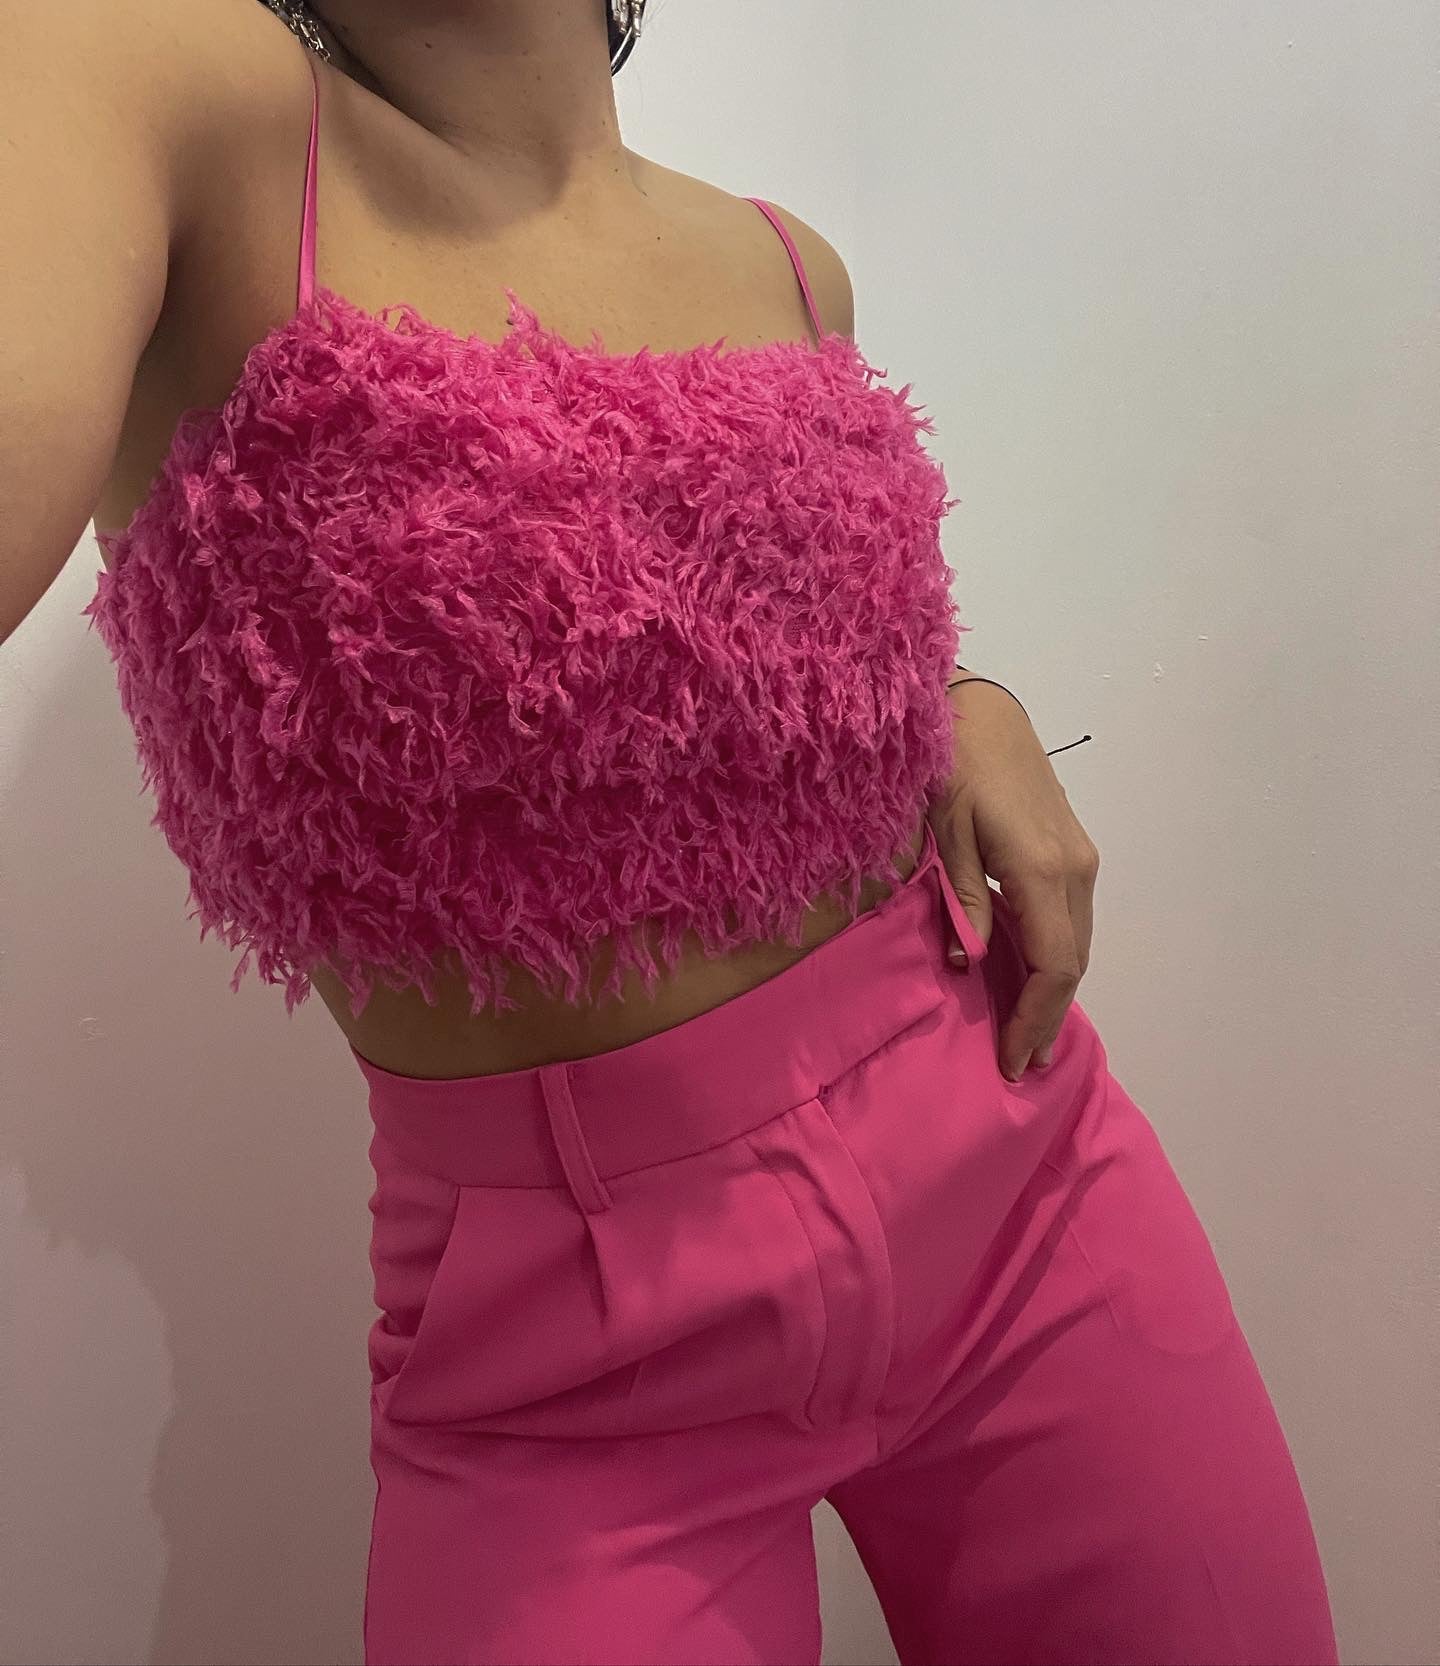 Hot Pink Feathers Top